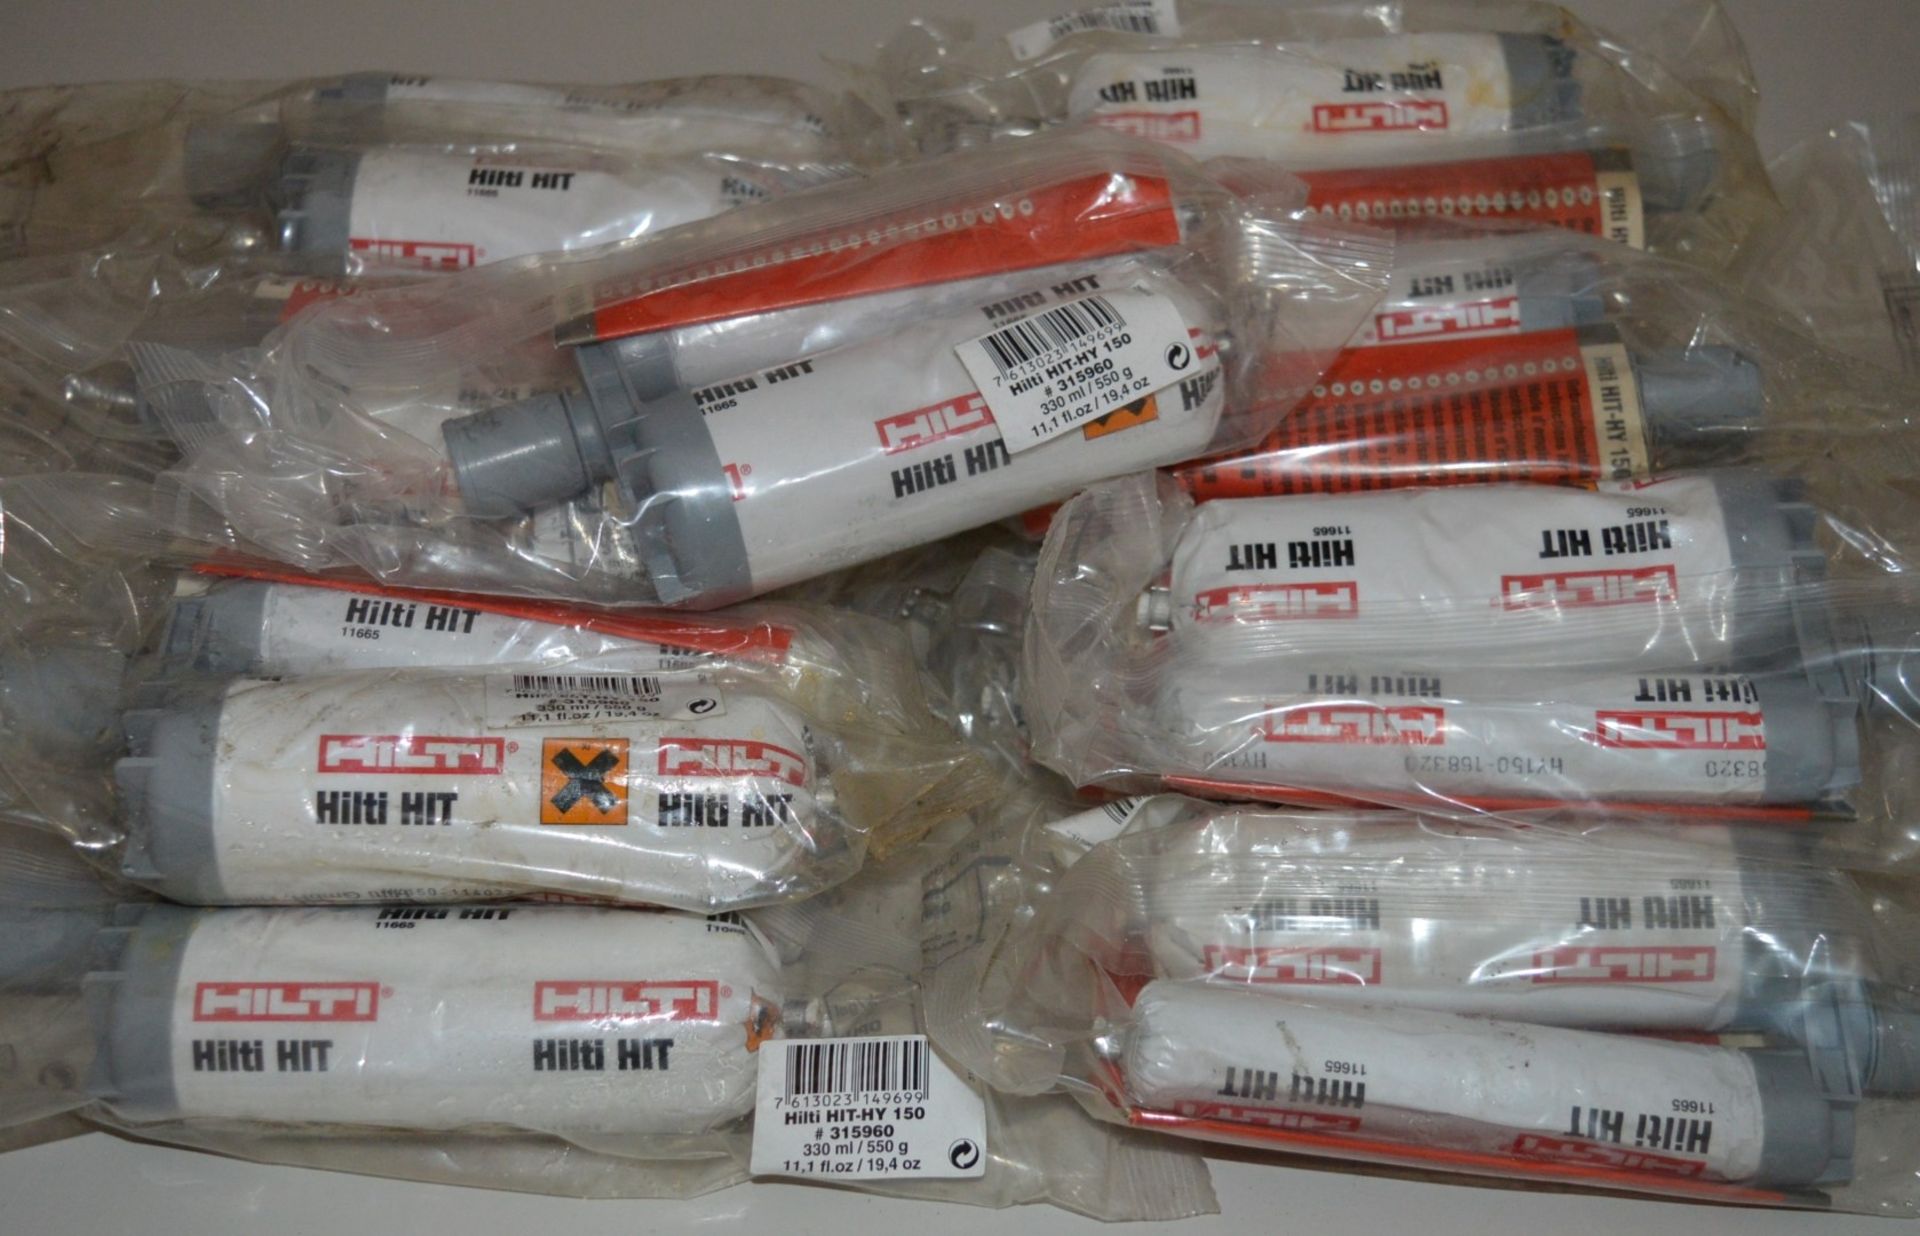 15 x Hilti HIT-HY 150 Adhesive Anchor - 330ml - Product Code 315960 - Unused Packs - CL300 - Ref - Image 2 of 4